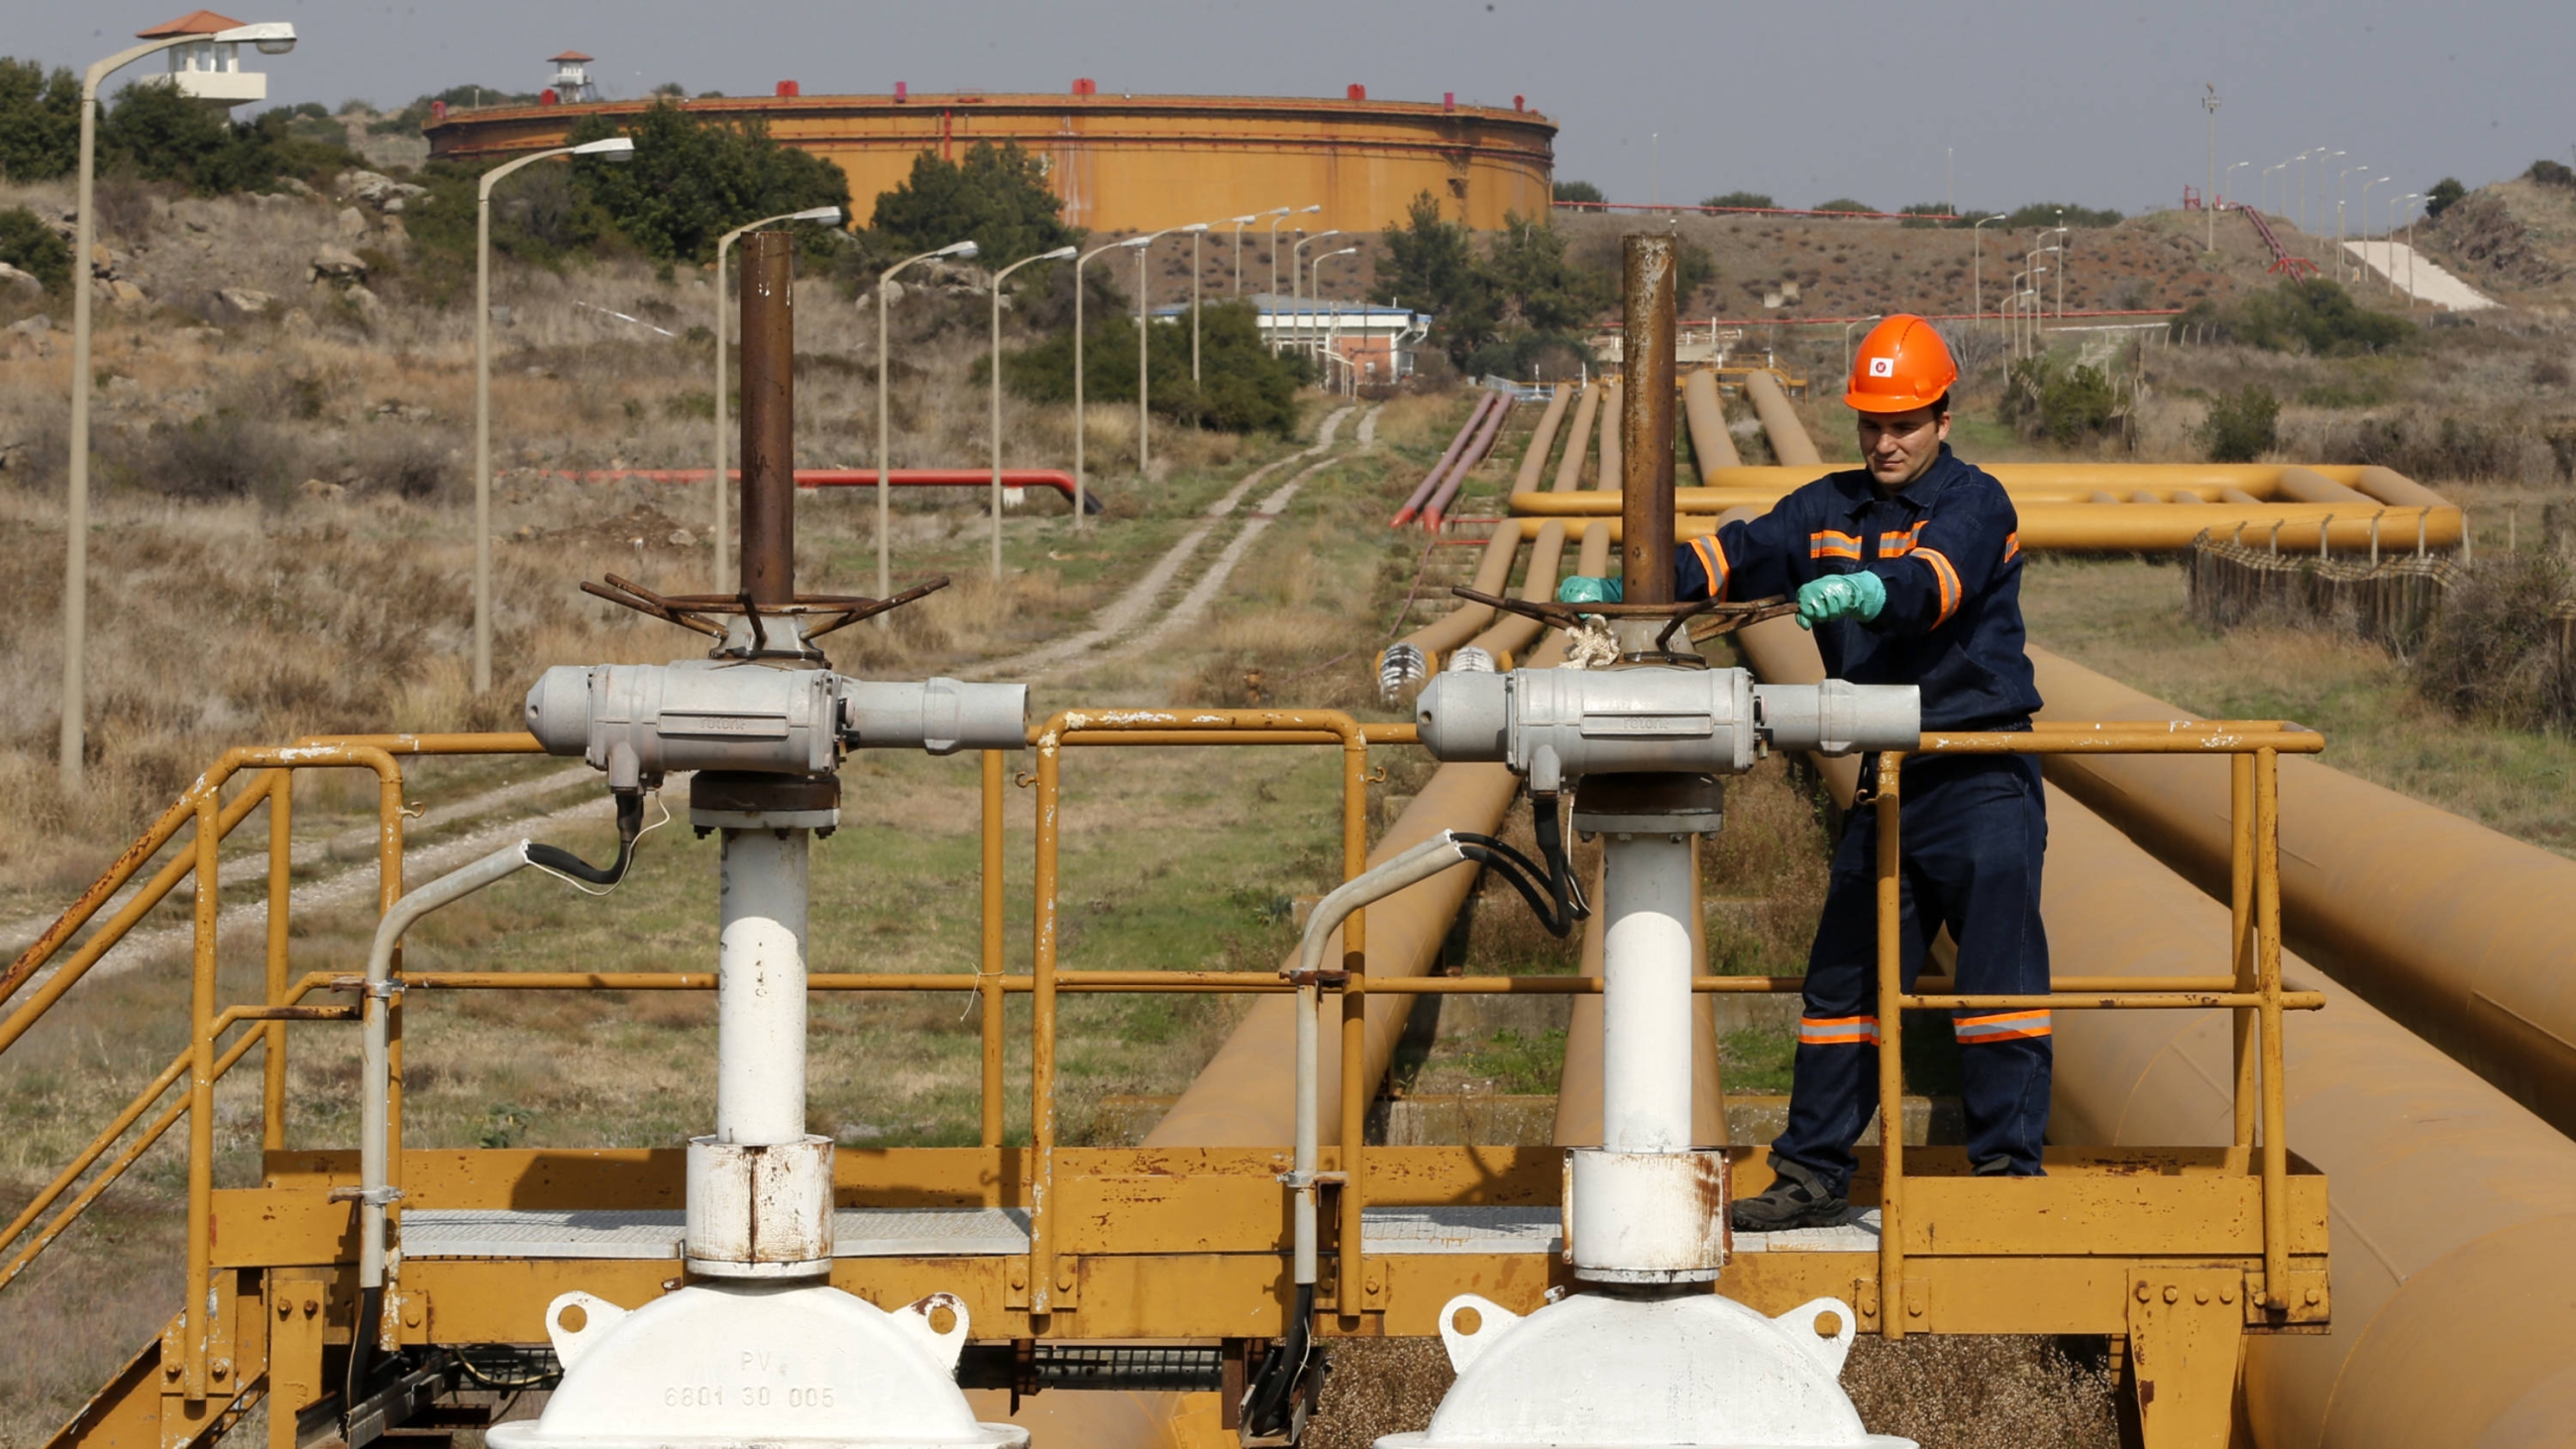 A worker checks the valve gears of pipes linked to oil tanks at Turkey's Mediterranean port of Ceyhan, which is run by state-owned Petroleum Pipeline Corporation